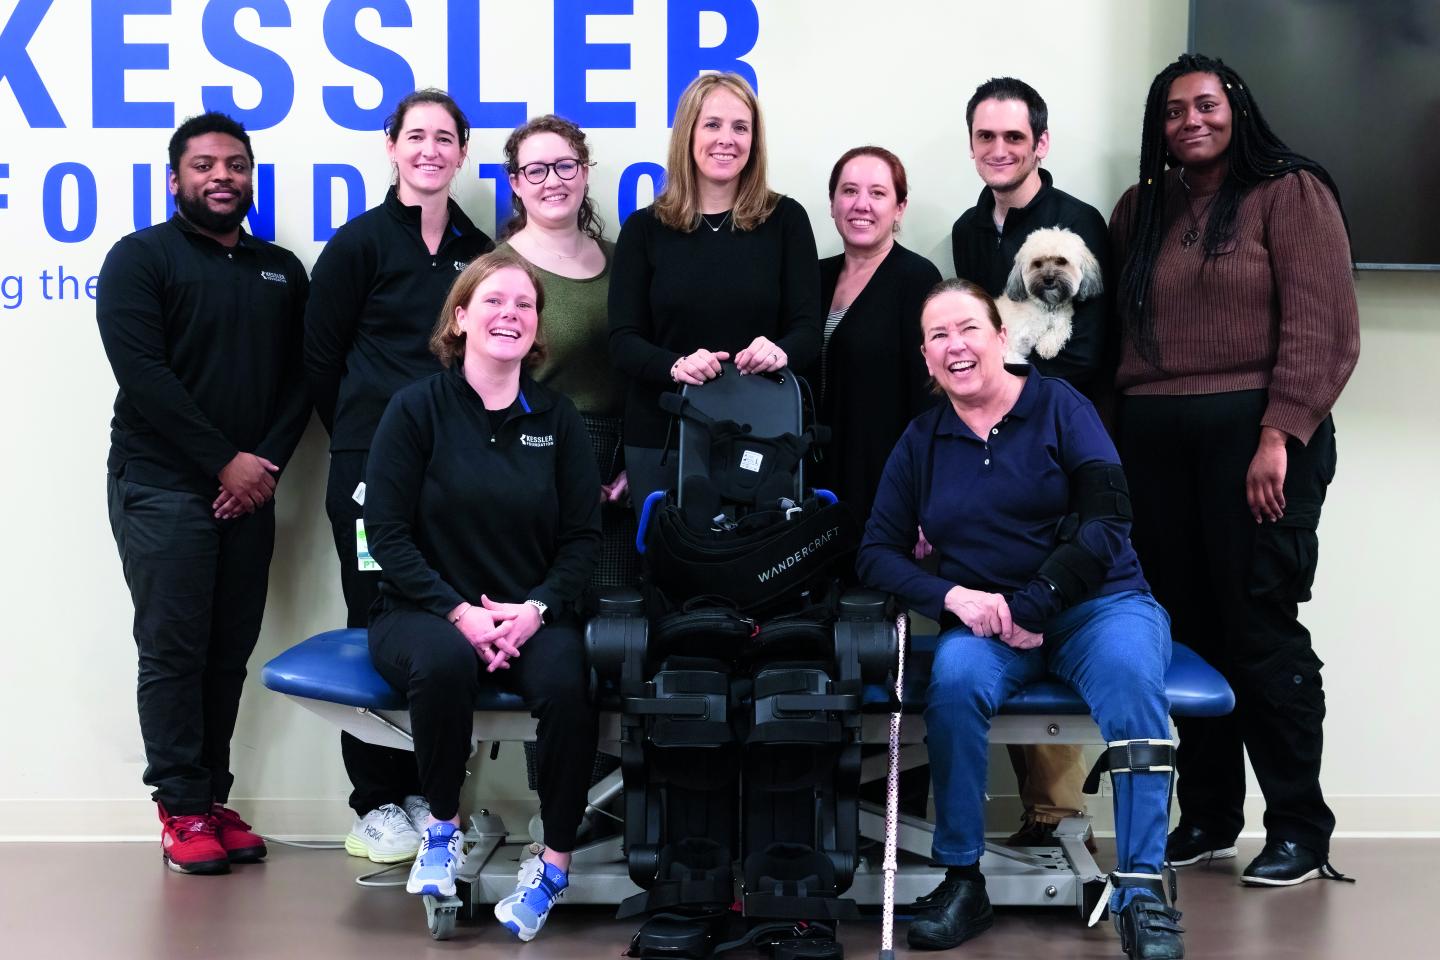 Suzanne cliff (first row, right) with her "chosen" family, Dr. Karen J. Nolan (back row, center) and the robotic exoskeleton research team.